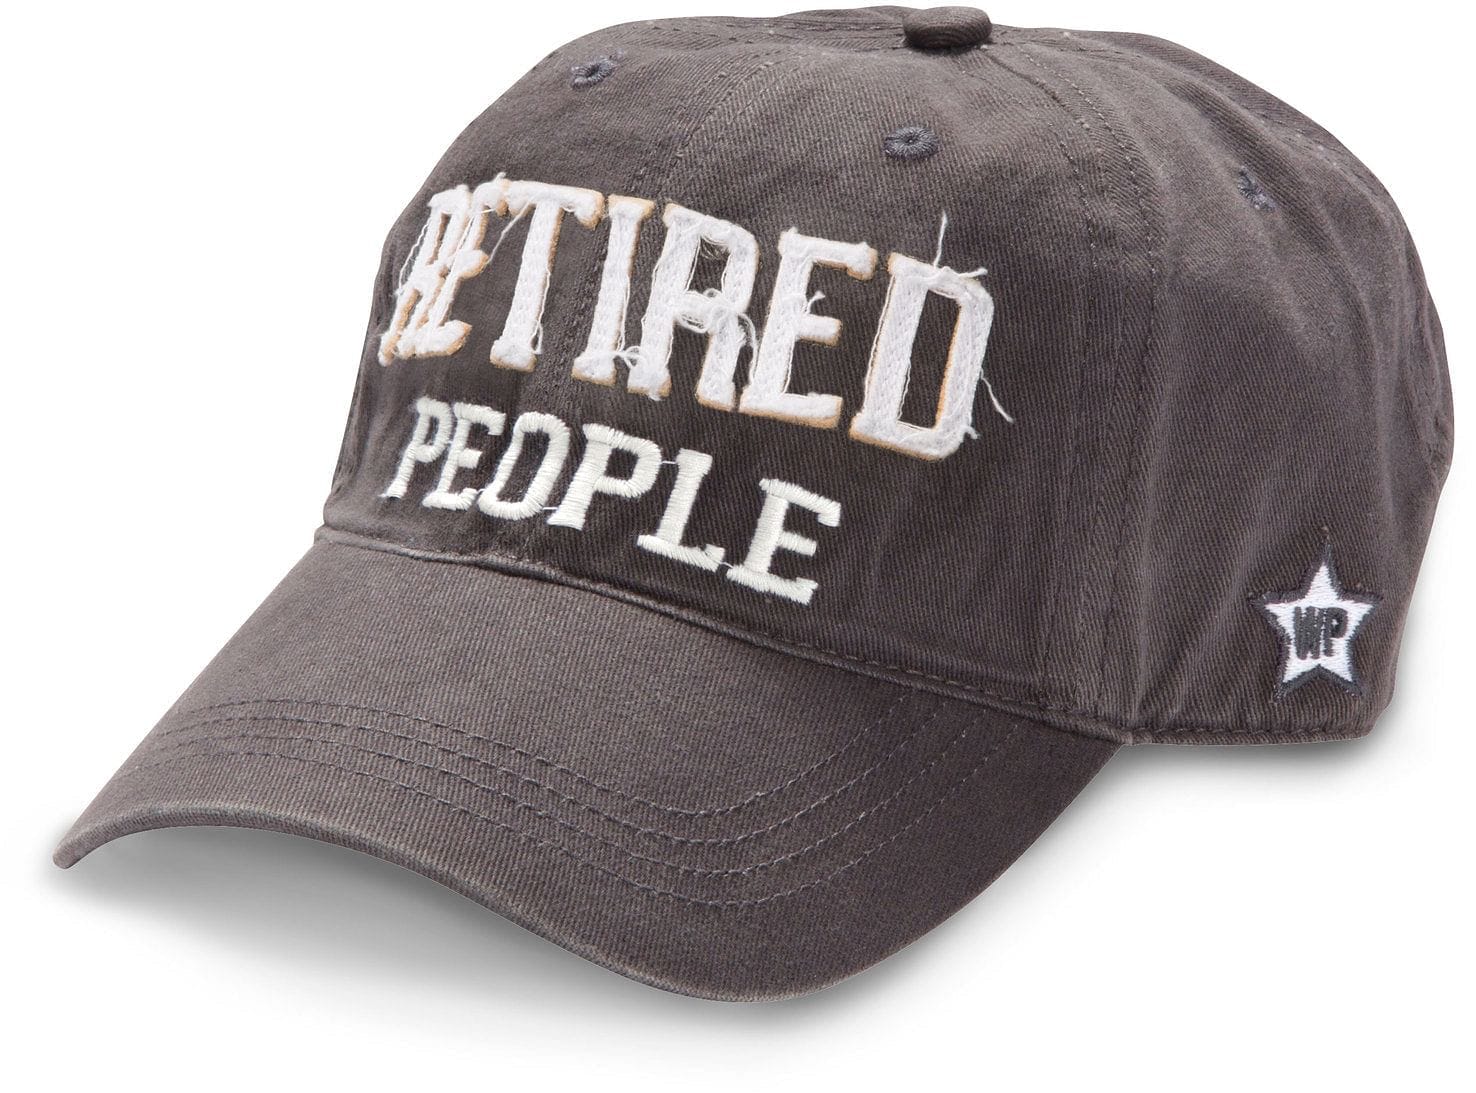 Retired People  - Dark Gray Adjustable Hat - Shelburne Country Store